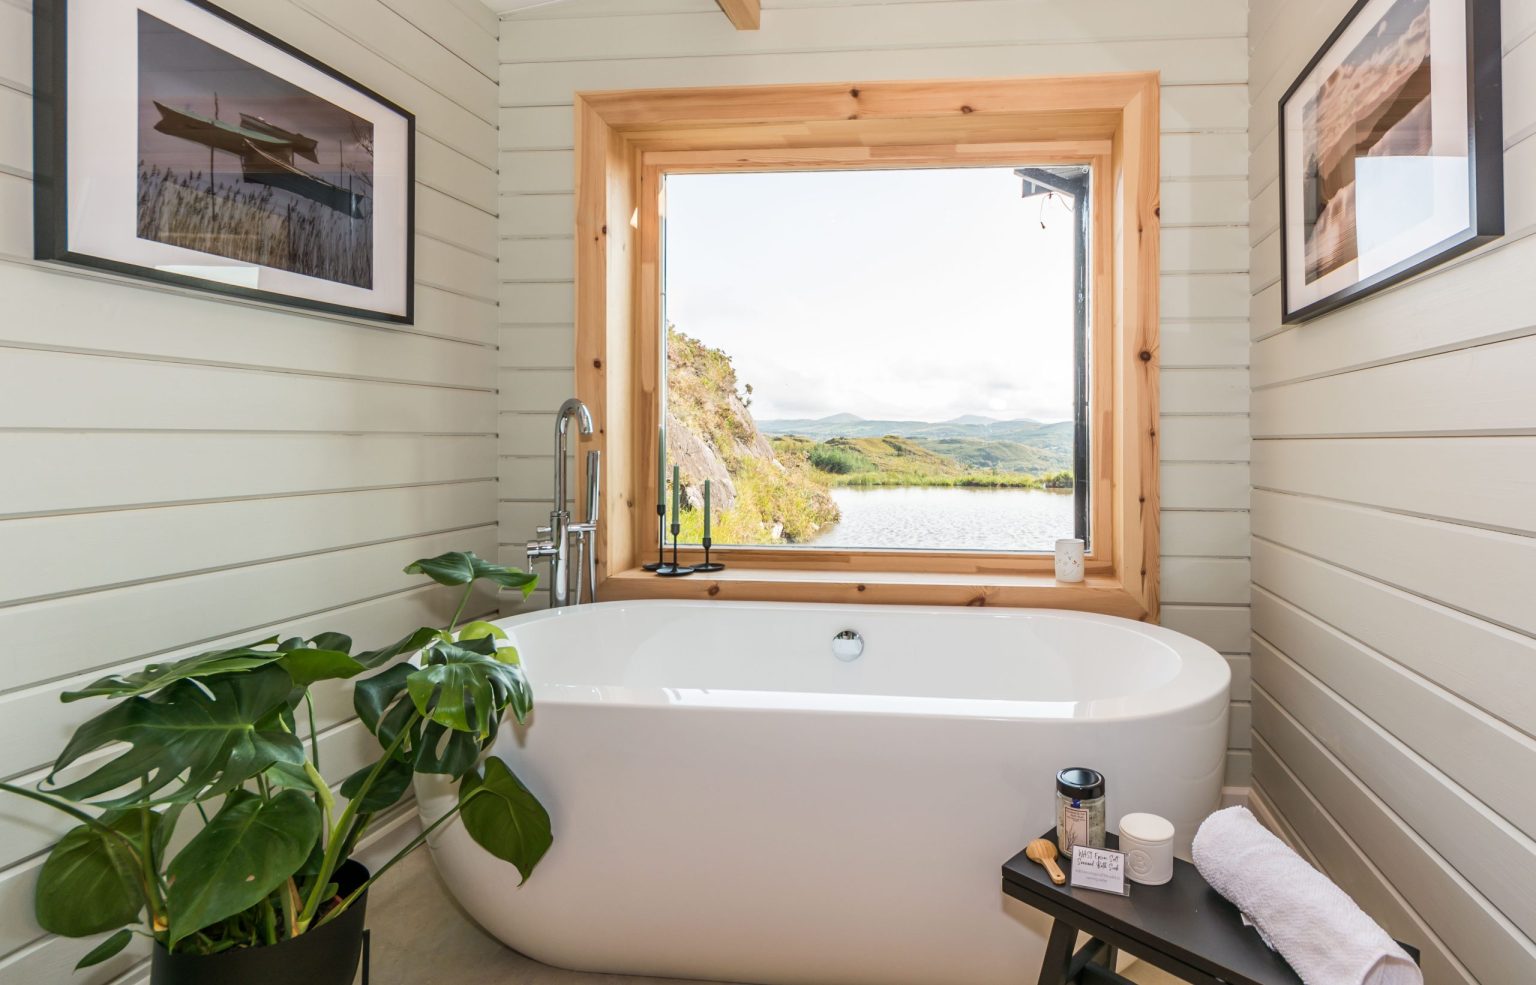 The Hidden Haven Bath with a view romantic